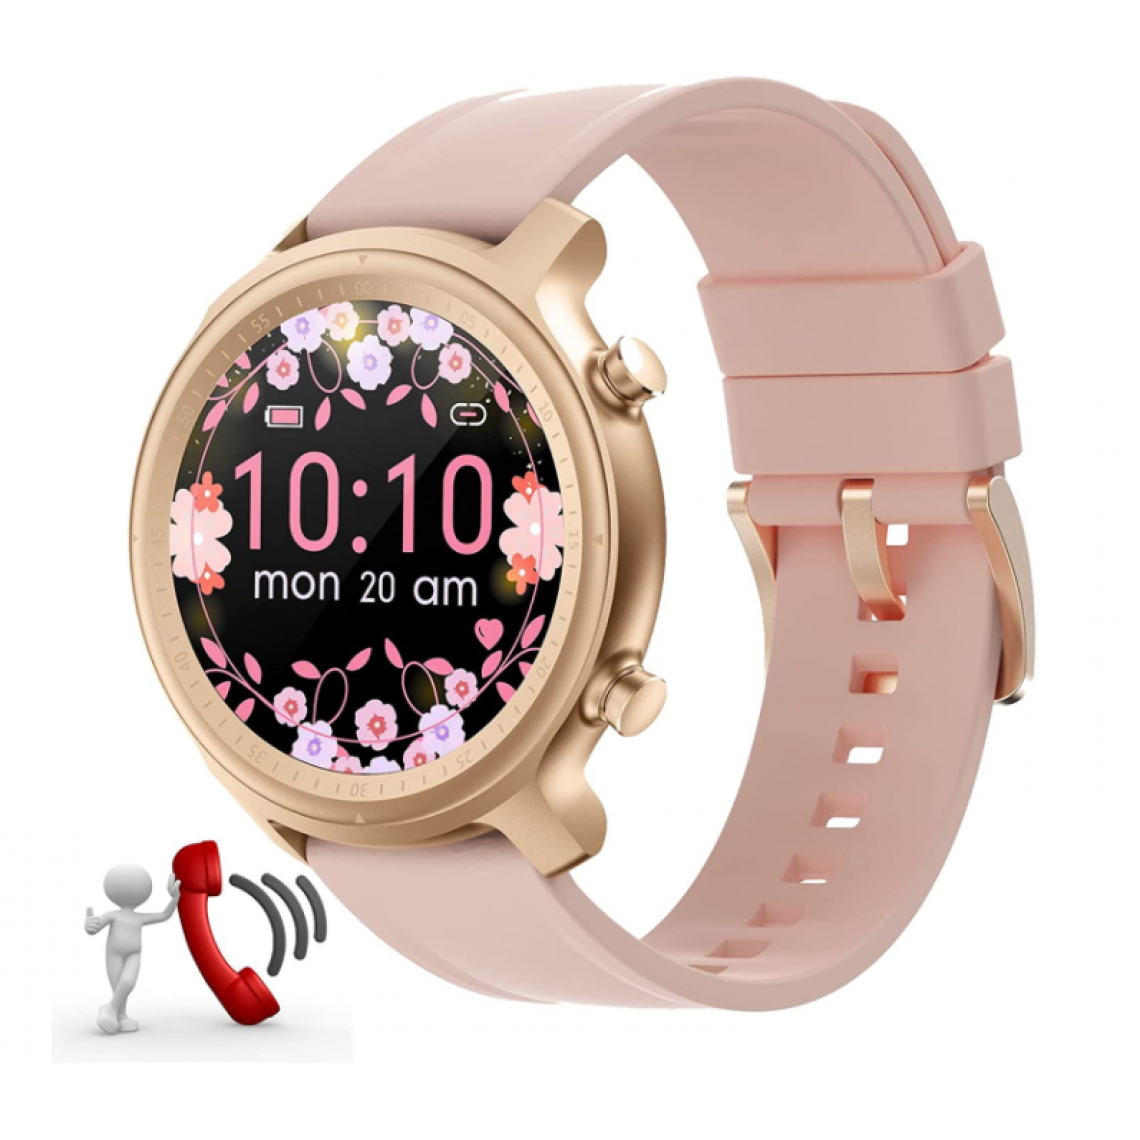 Chronotech Montres - Chronus Women's Smart Watch, Bluetooth Make or Receive Calls, Round Touch Screen Water Resistant Steps Calories Sleep SMS for Android iPhone (Rose) - Montre connectée